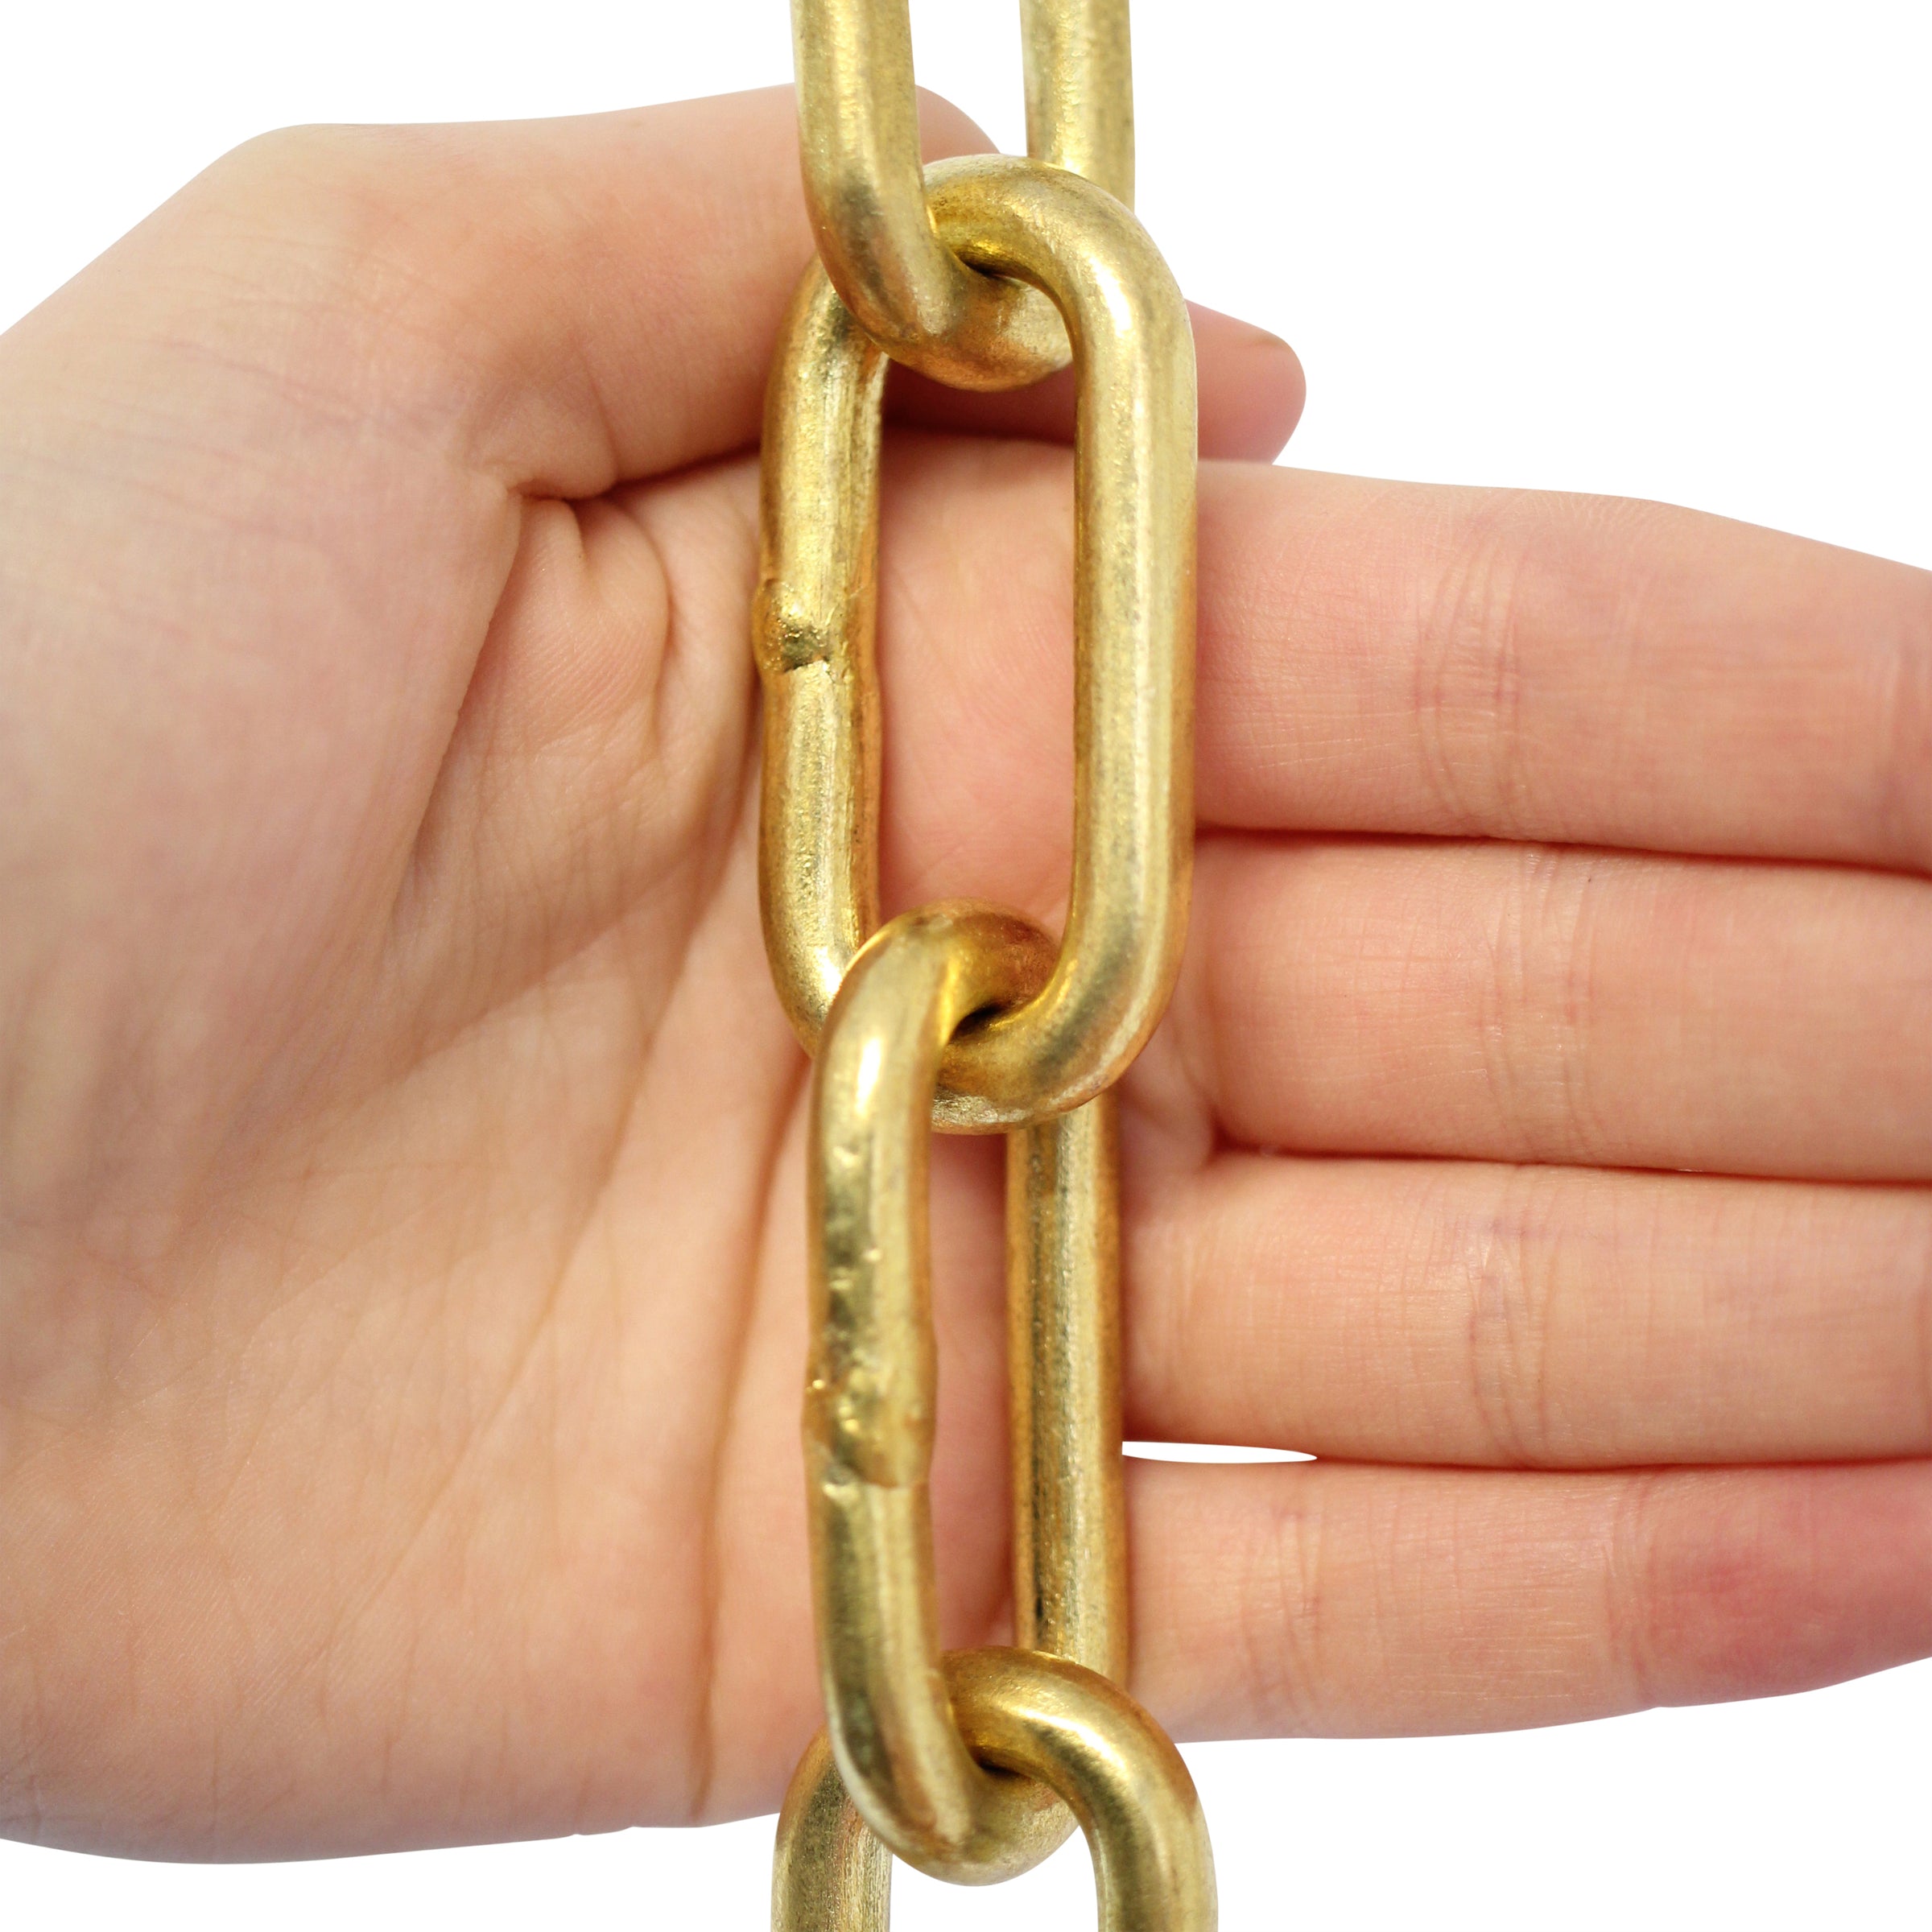 Heavy Gothic Weathered Brass Finish Chain - 1 Yard Length (See more  description)